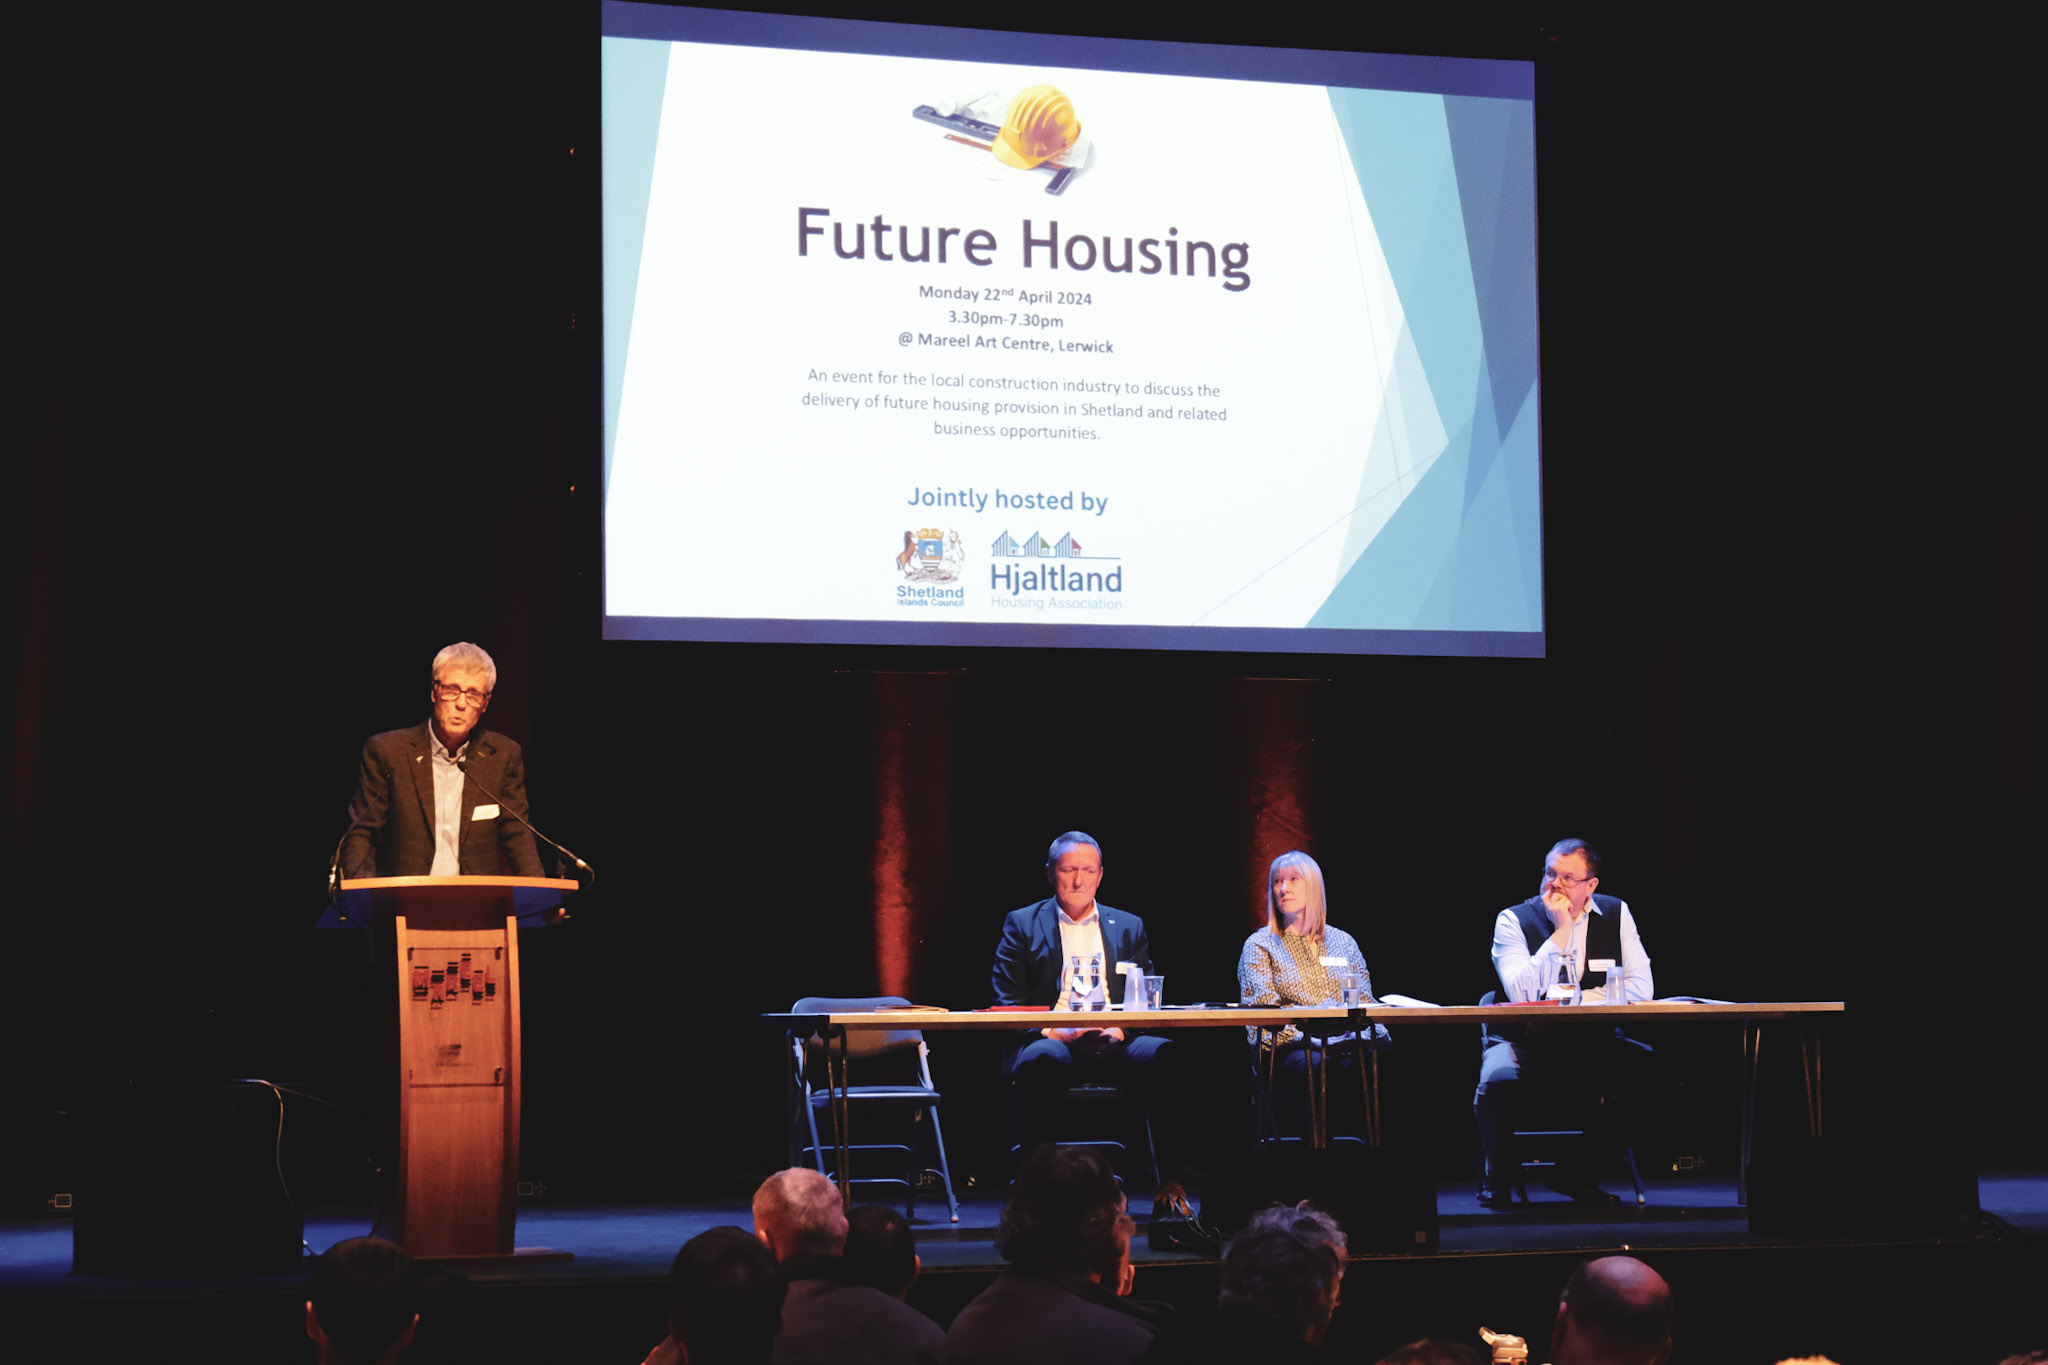 Dennis Leask on stage at the Future Housing event. Credit: SIC